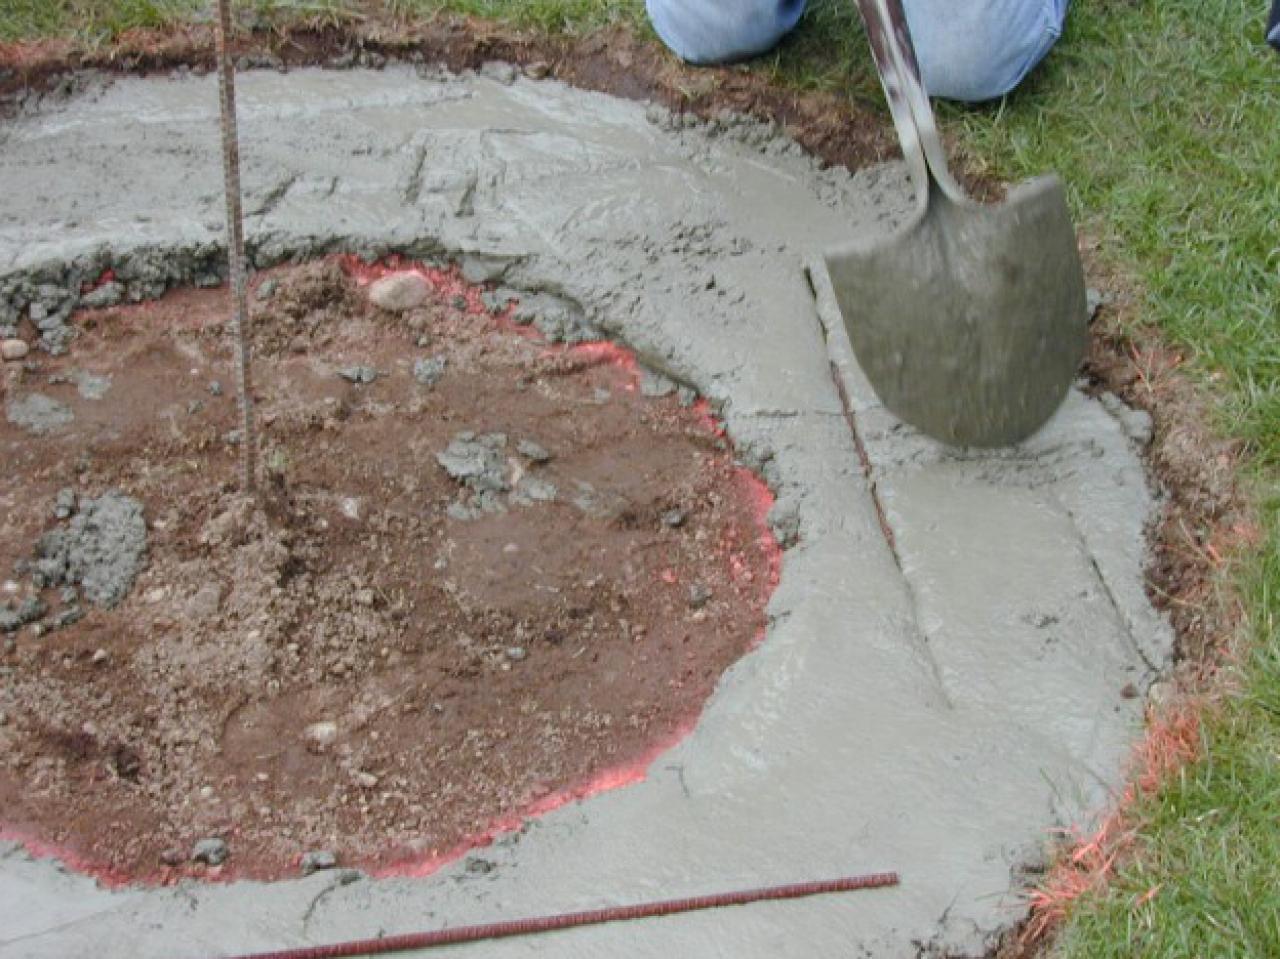 How To Prepare For A Fire Pit Tos, How To Protect Concrete From Fire Pit